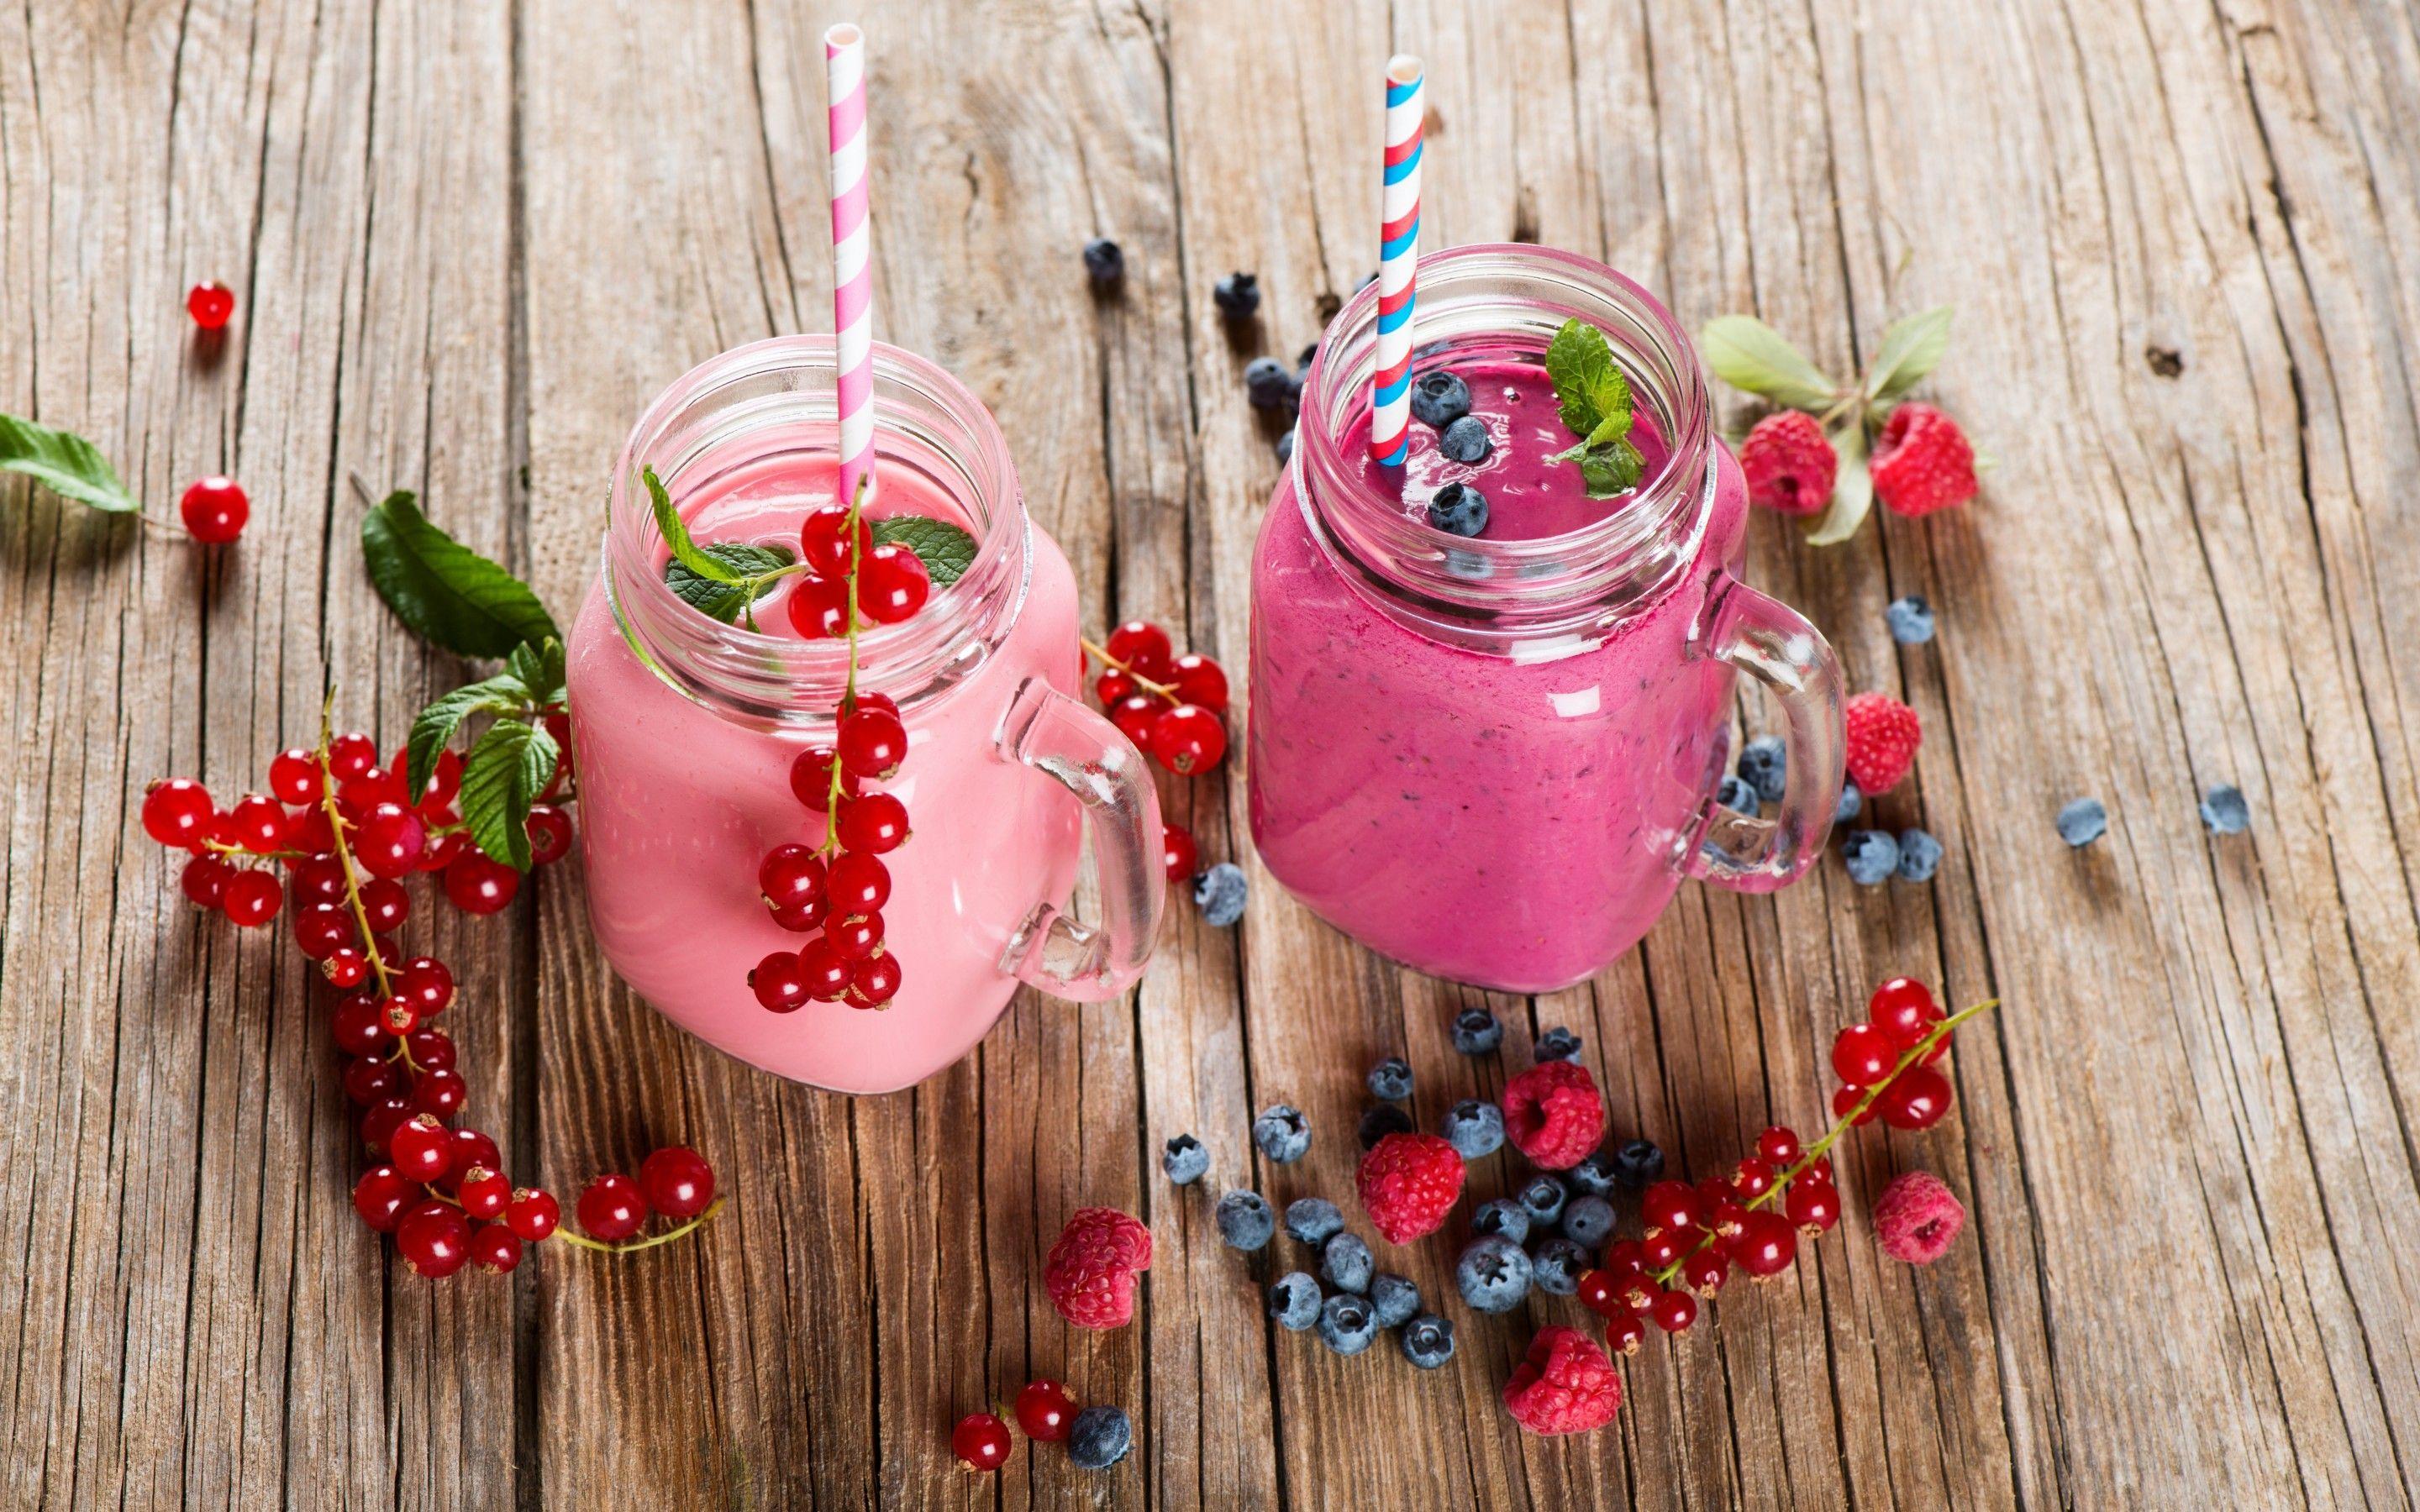 Download 2880x1800 Smoothie, Berries, Straw Wallpaper for MacBook